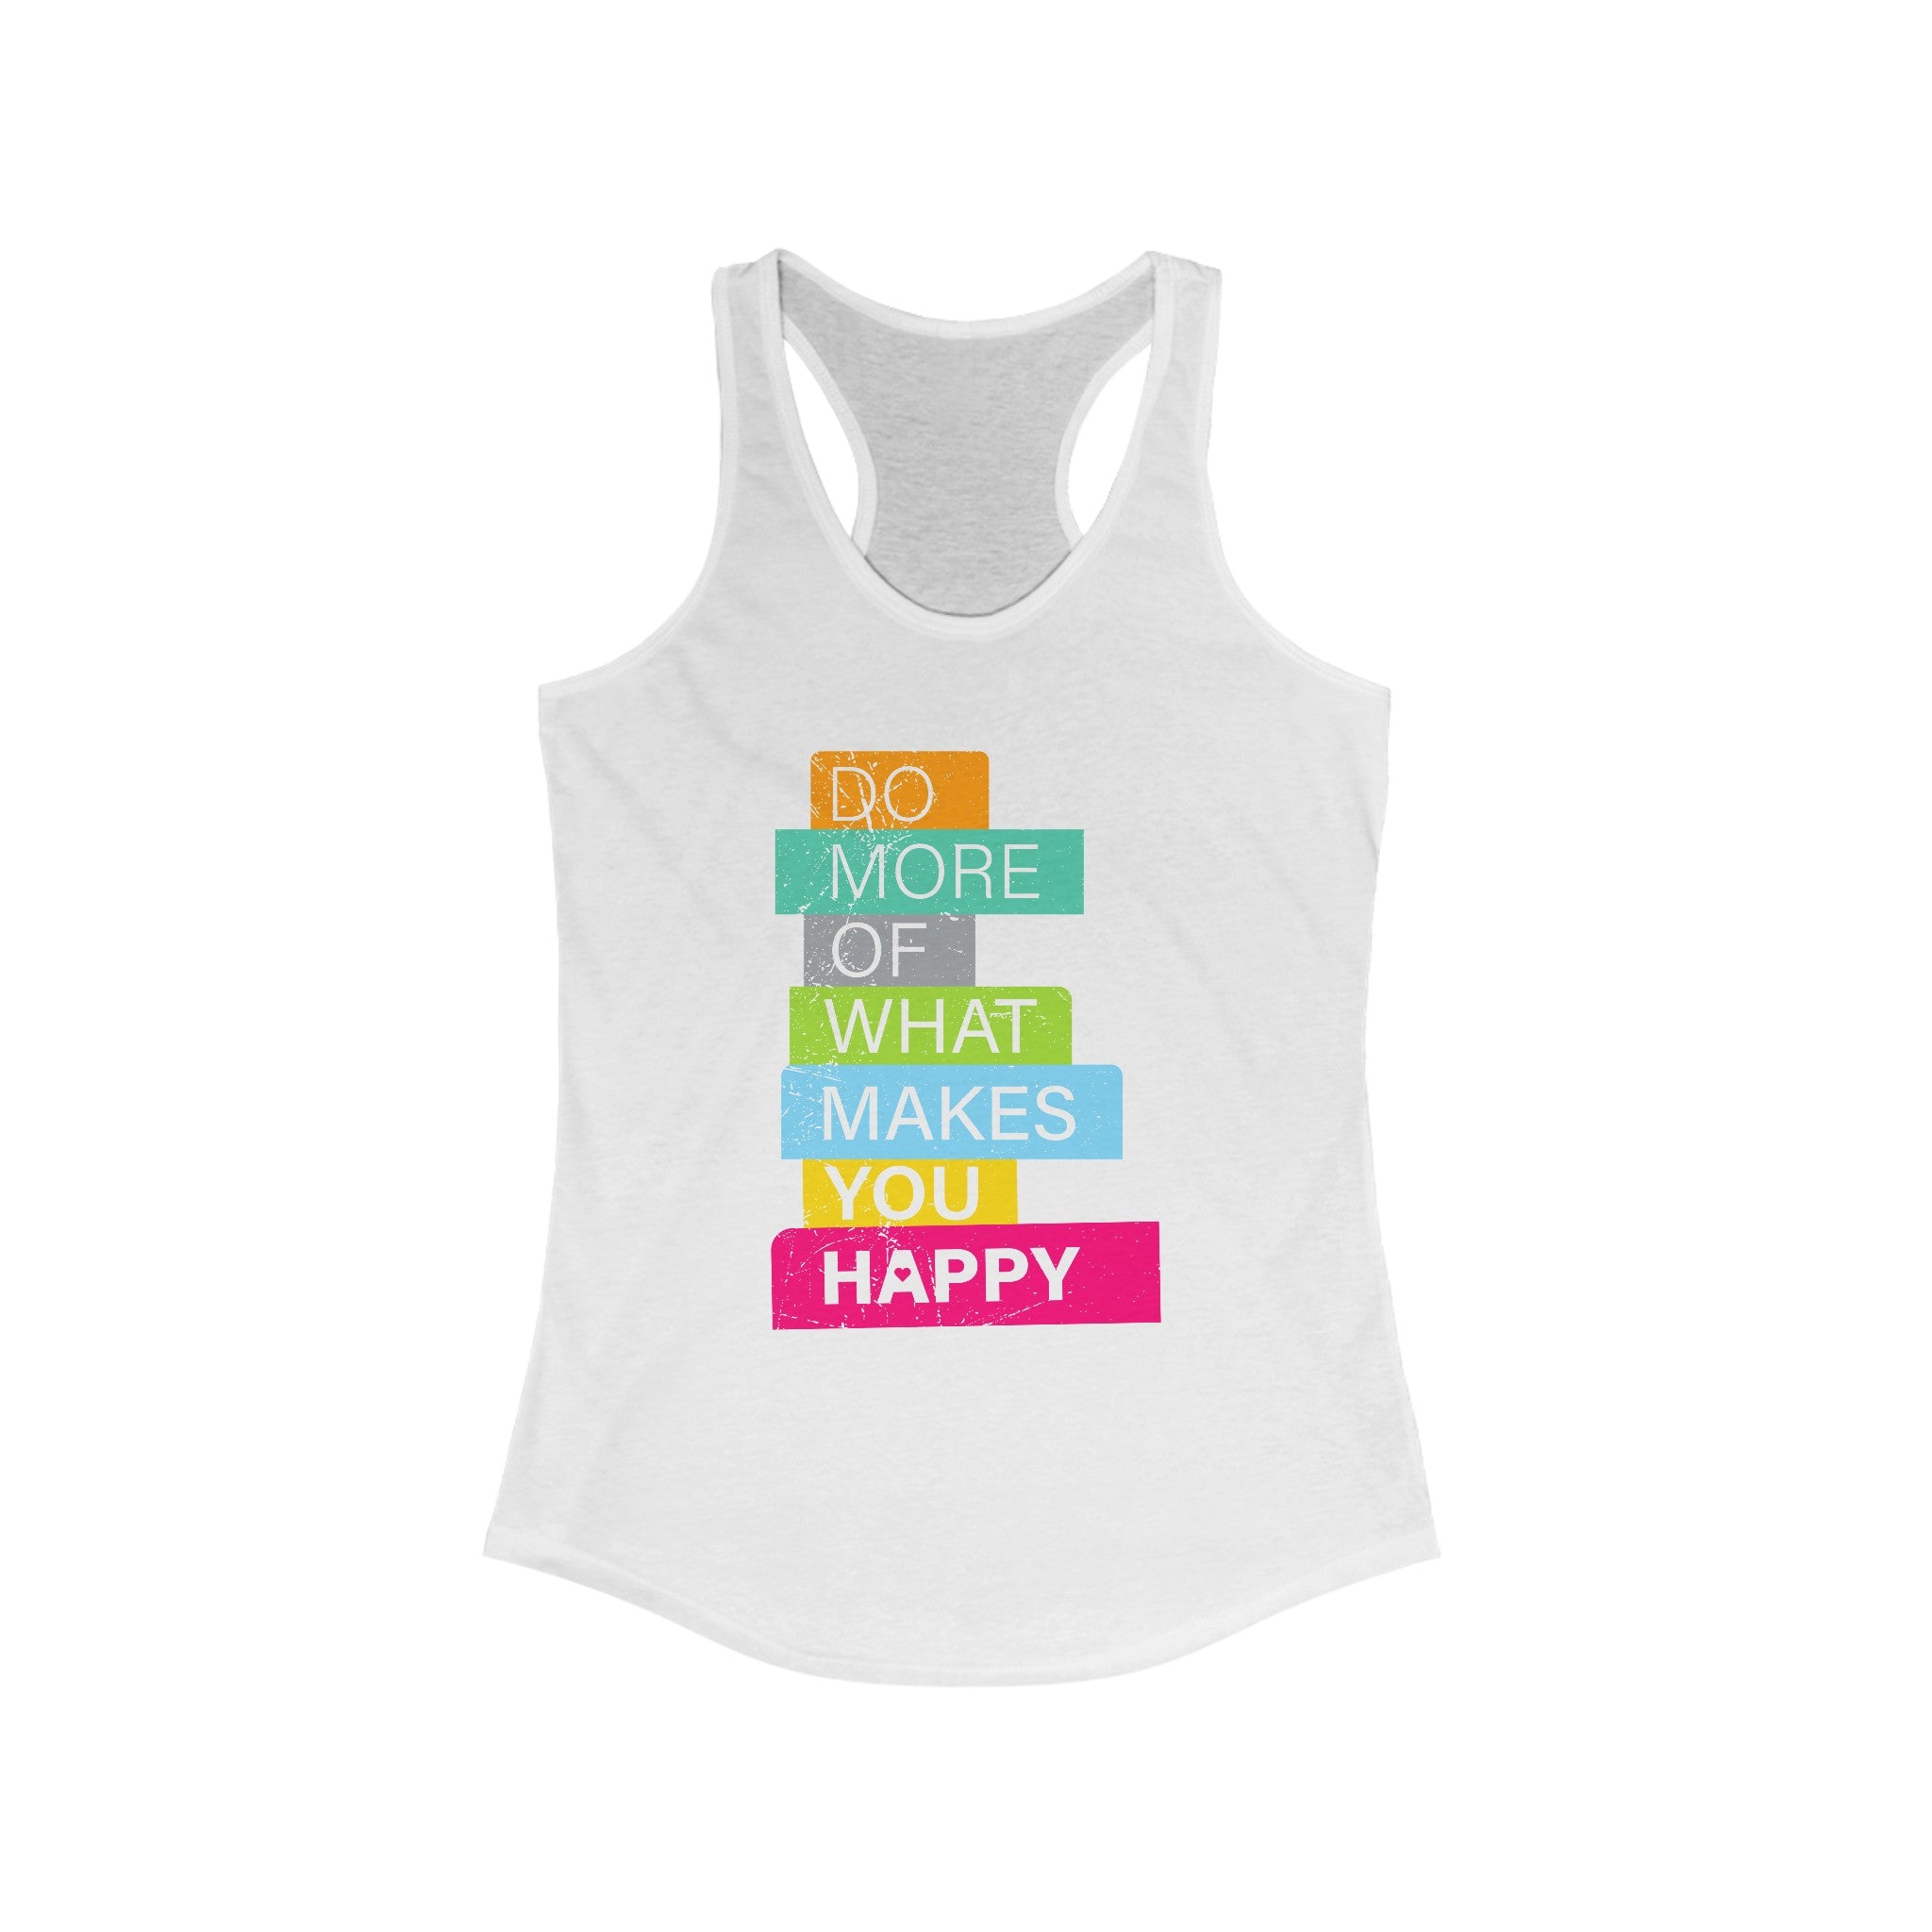 Do More of What Makes You Happy - Women's Racerback Tank